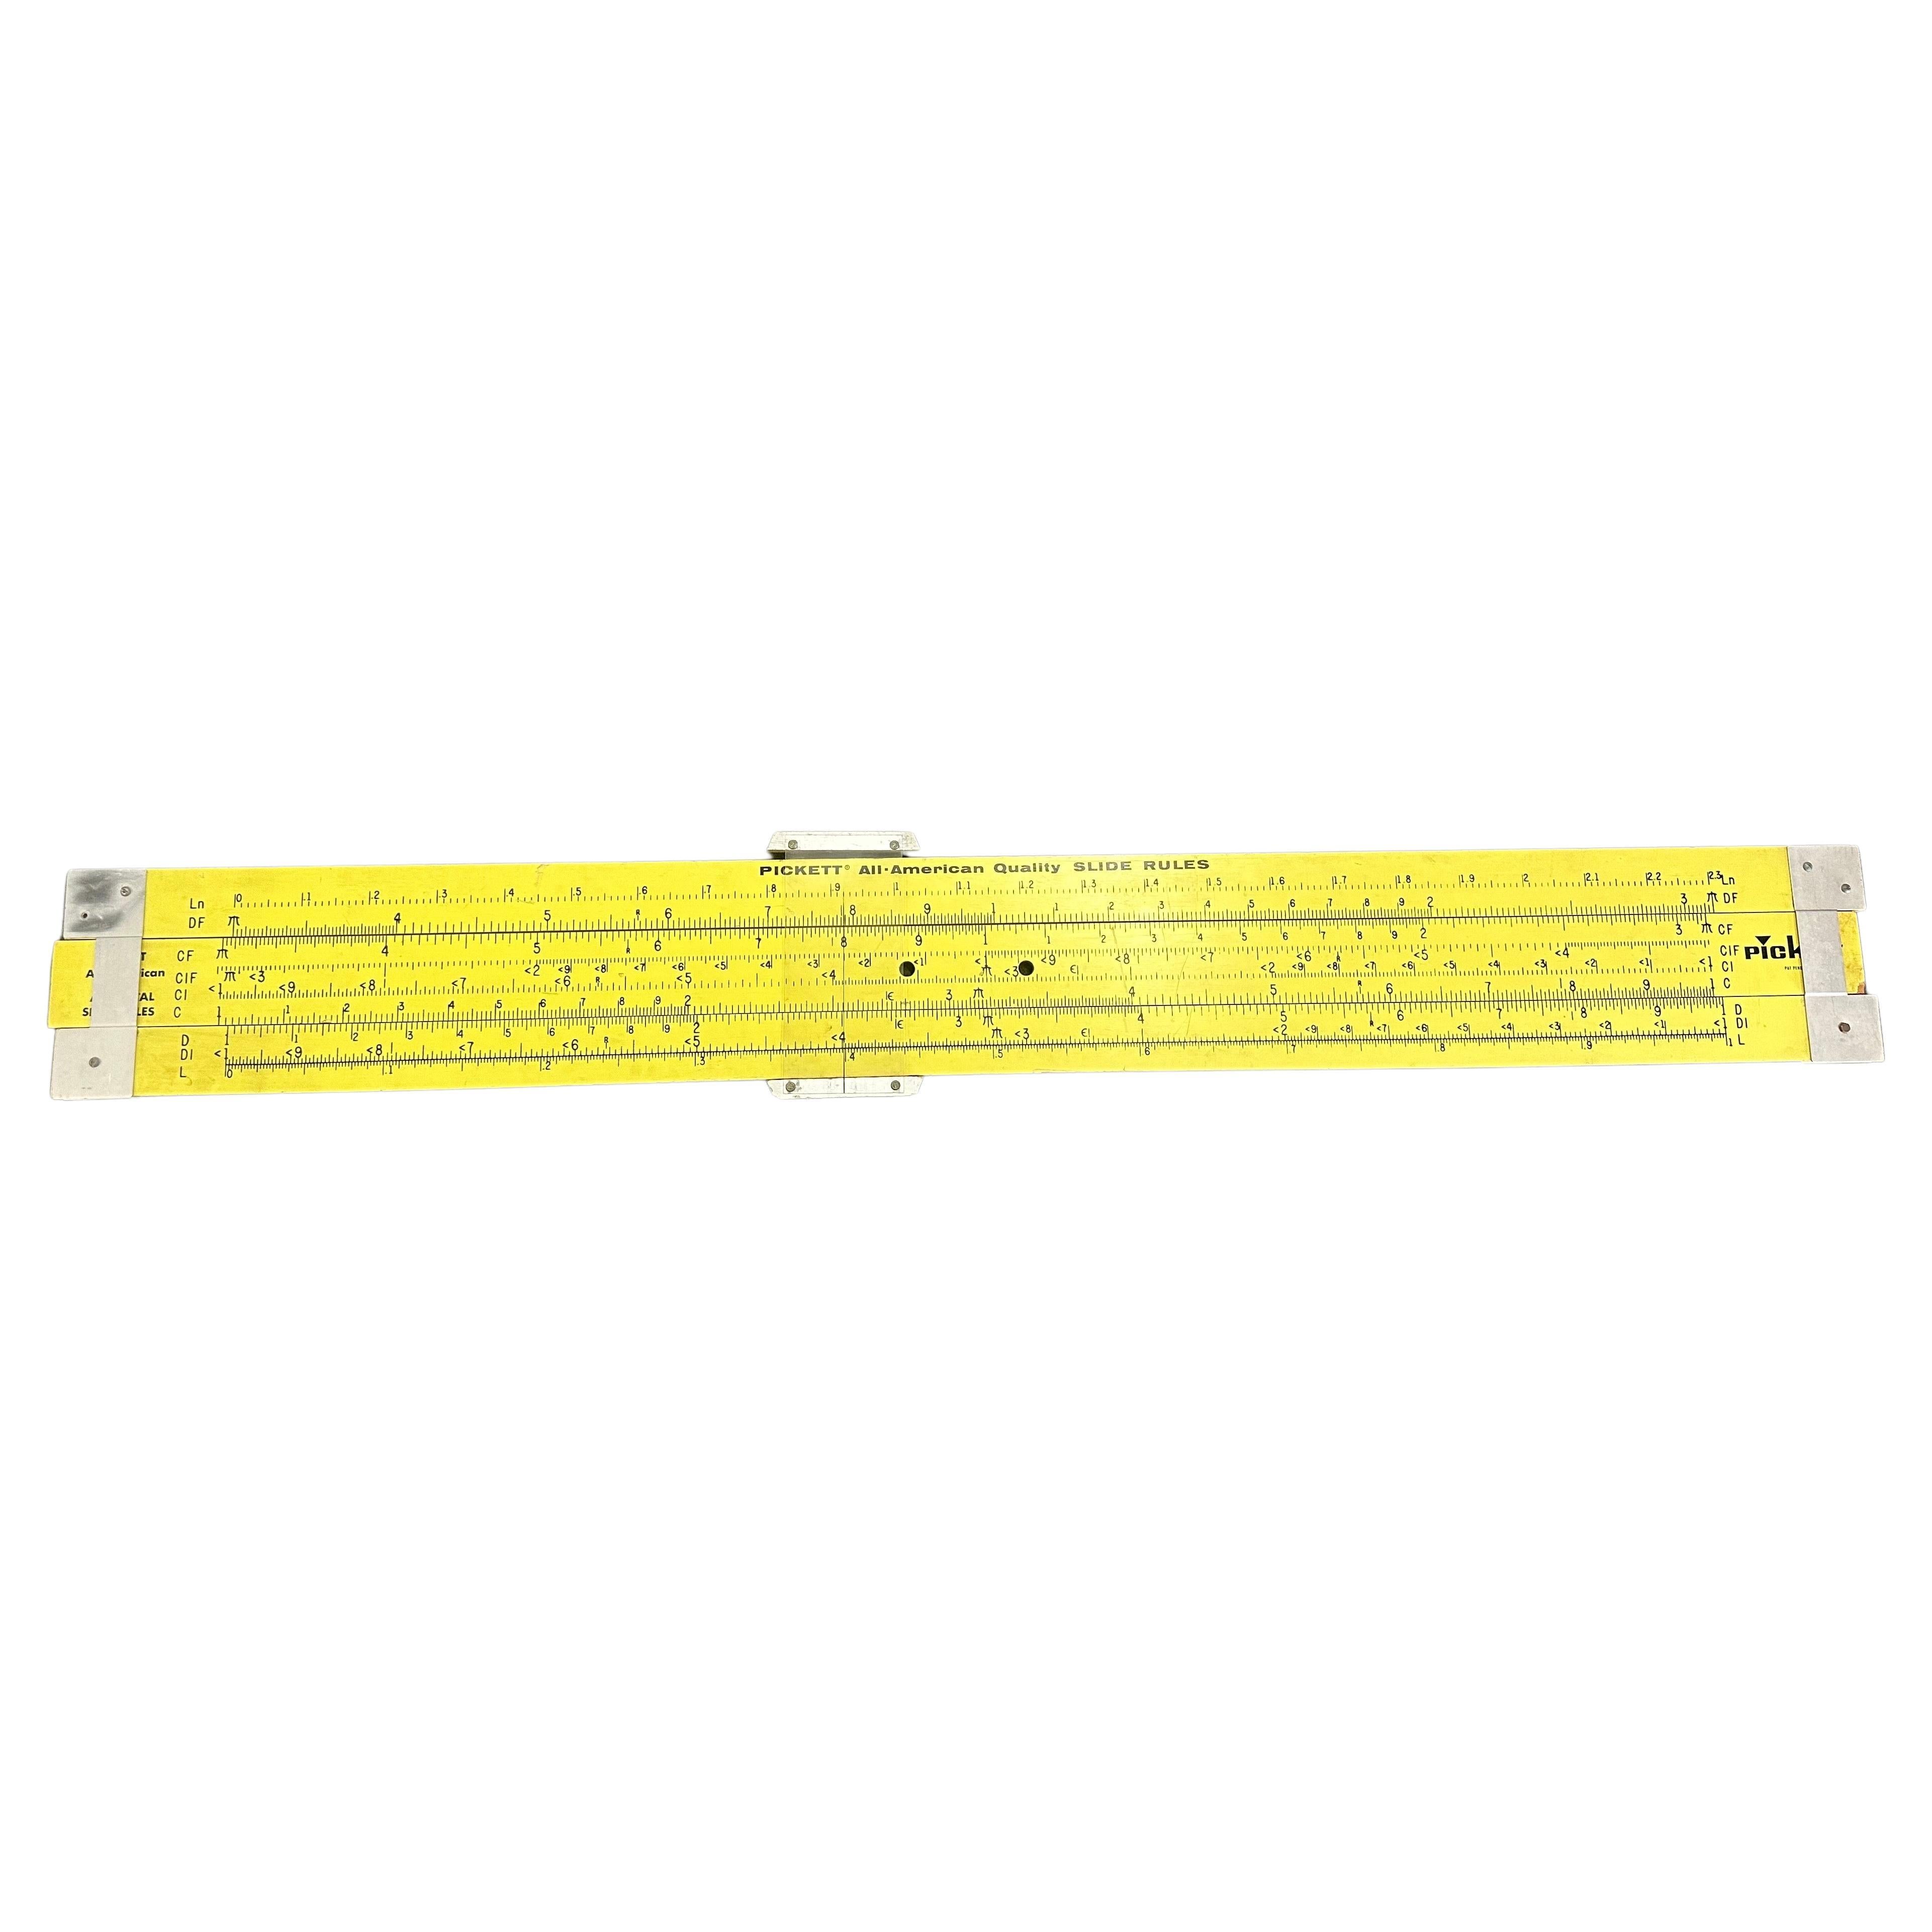 A unique vintage oversized 7' industrial slide rule by Pickett, circa 1960s.  The slide rule is a working model that was most likely used in a class room.  It has two holes to mount, is made of yellow painted plywood with aluminum end caps and is